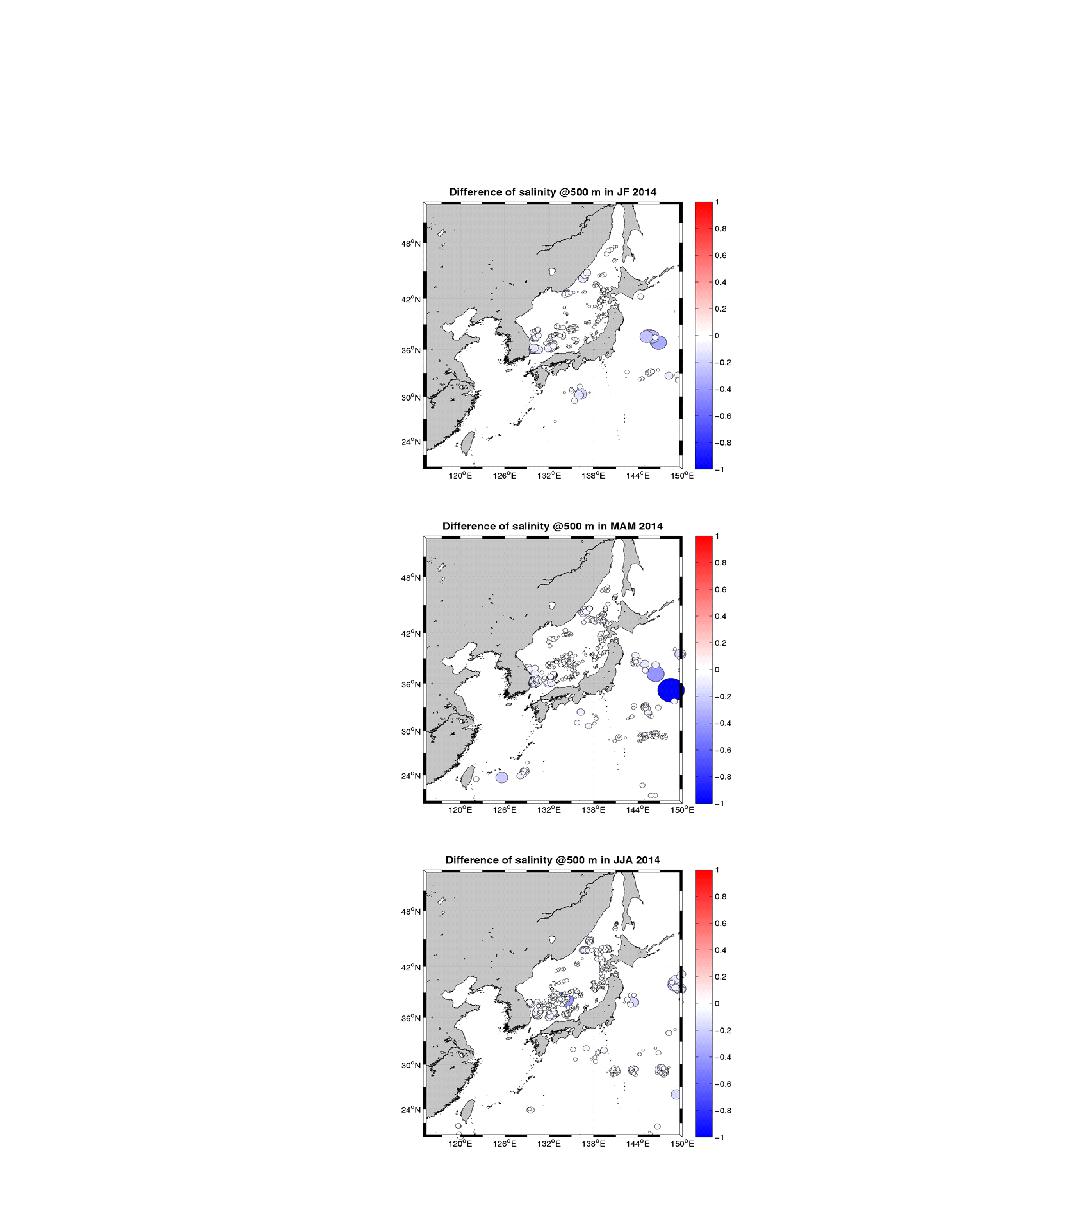 Spatial distribution of salinity differencebetween ARGO observation and model at